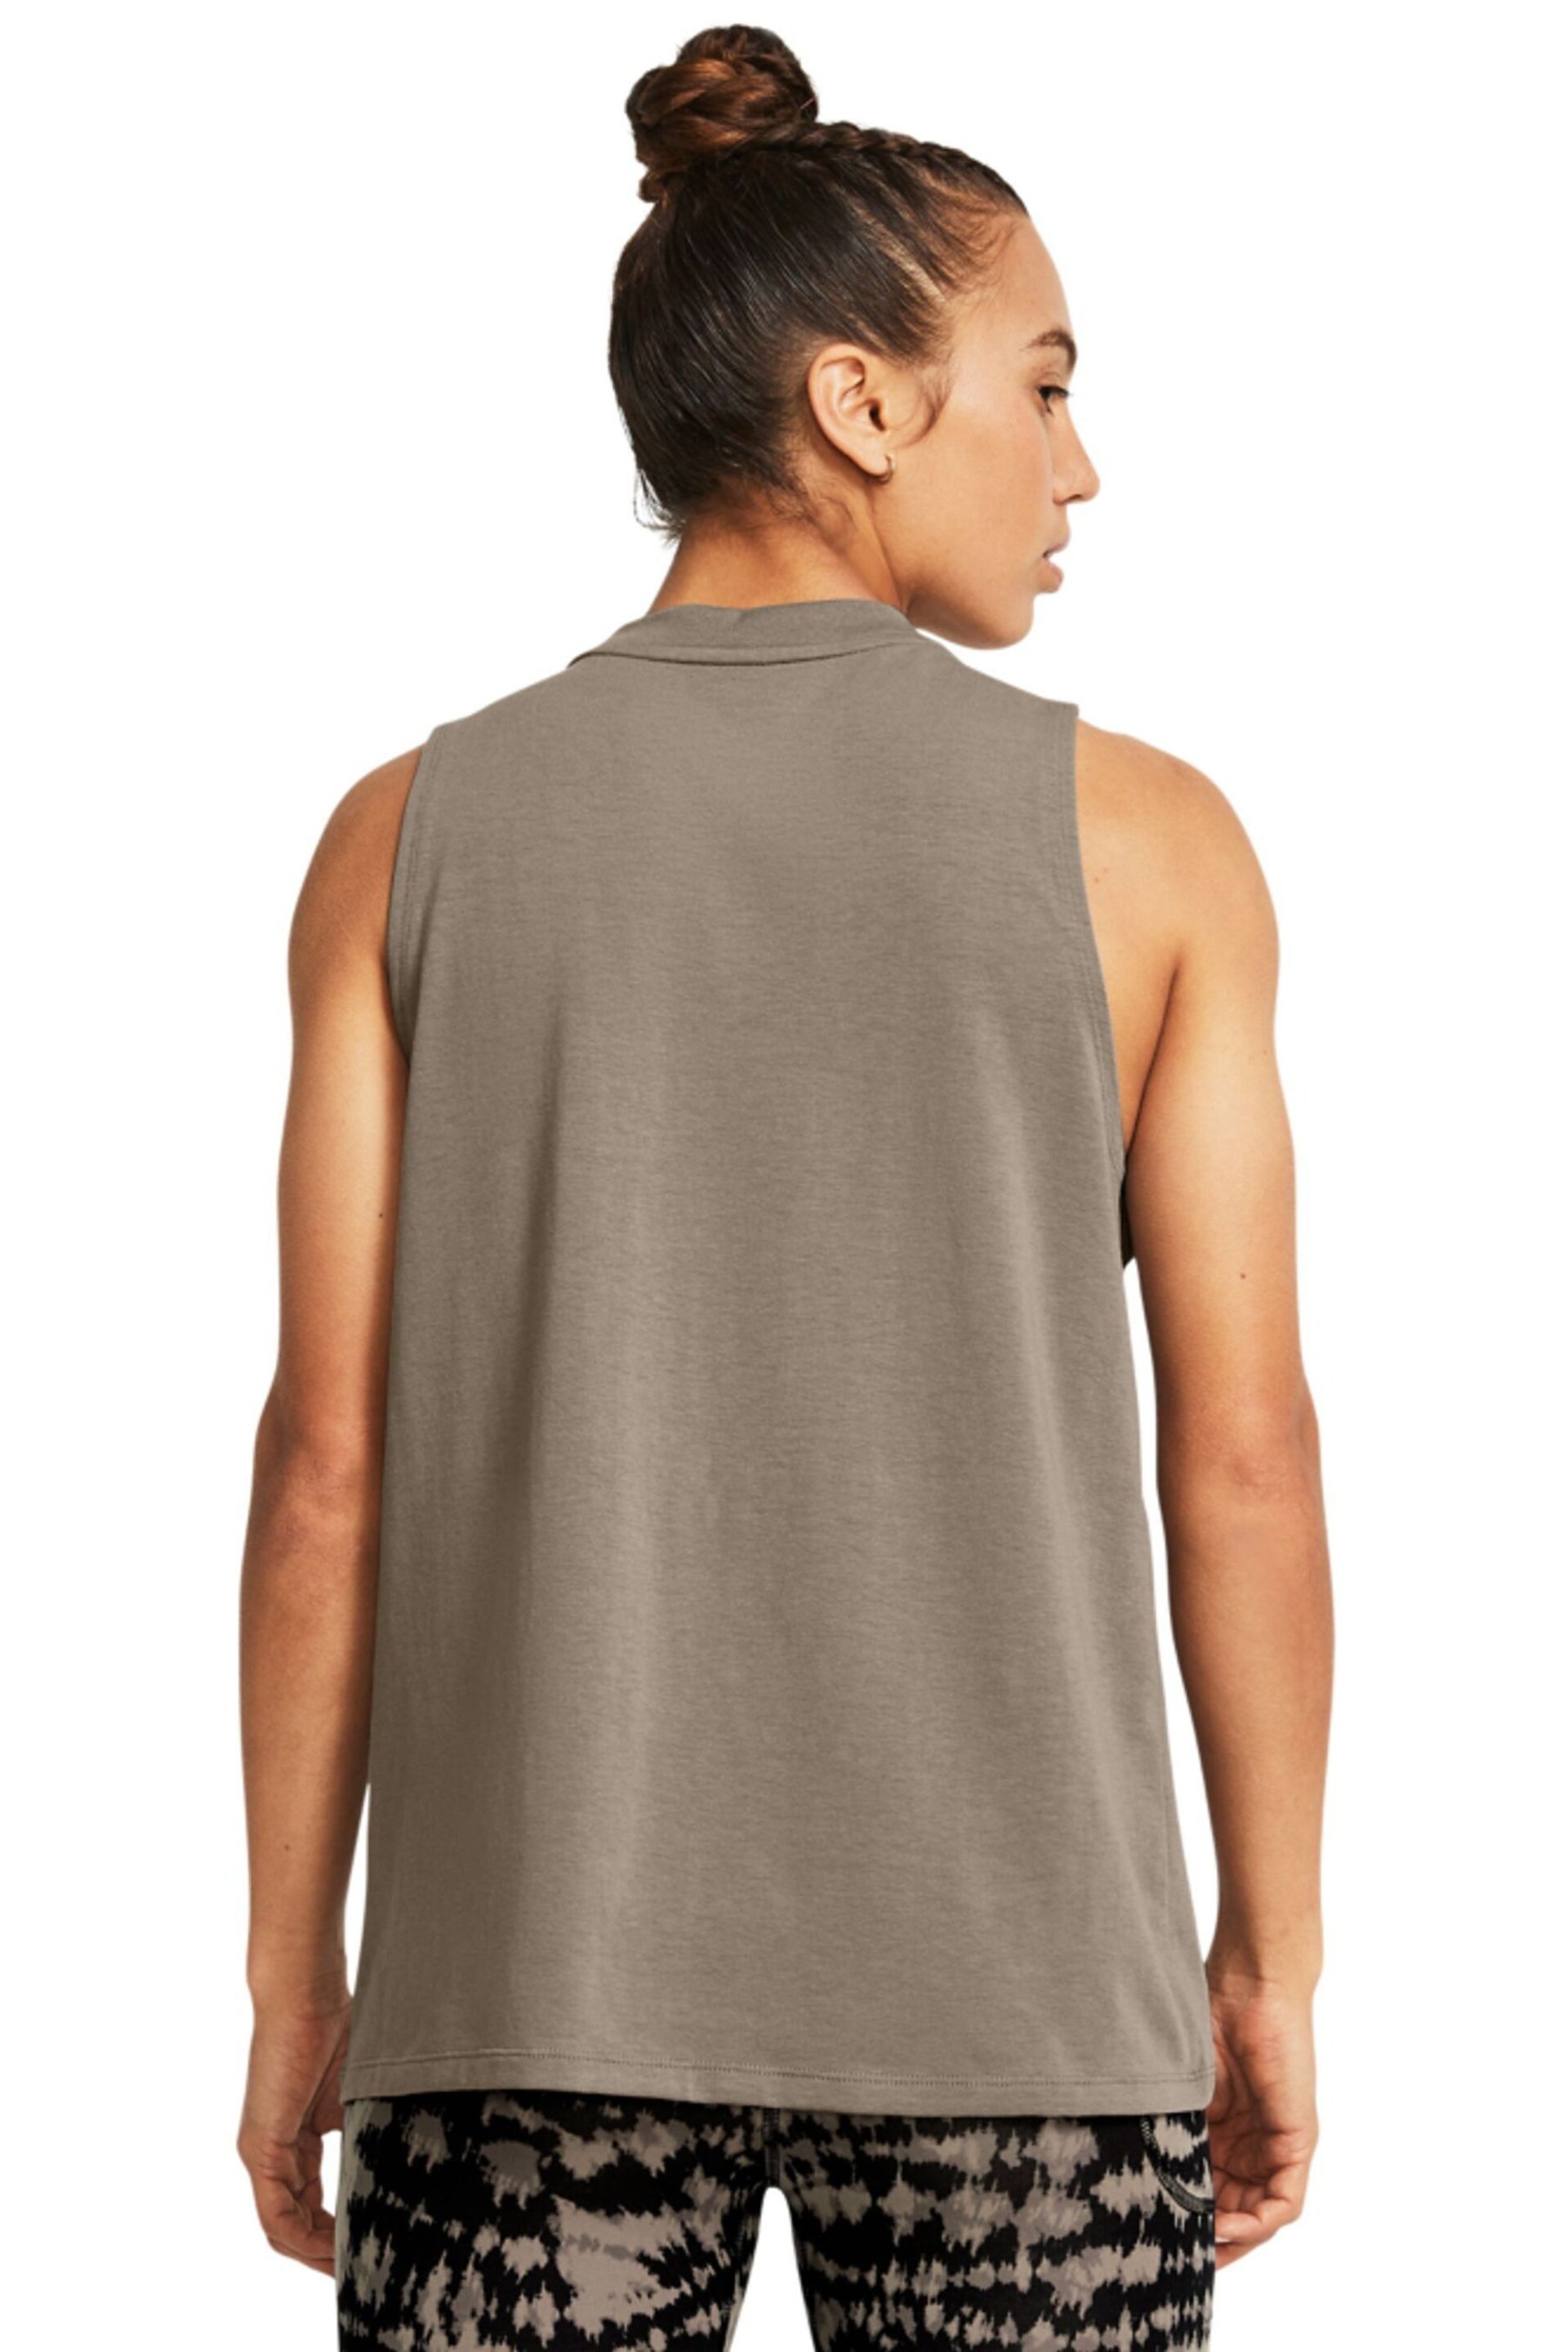 Under Armour Brown Campus Muscle Vest - Image 2 of 4